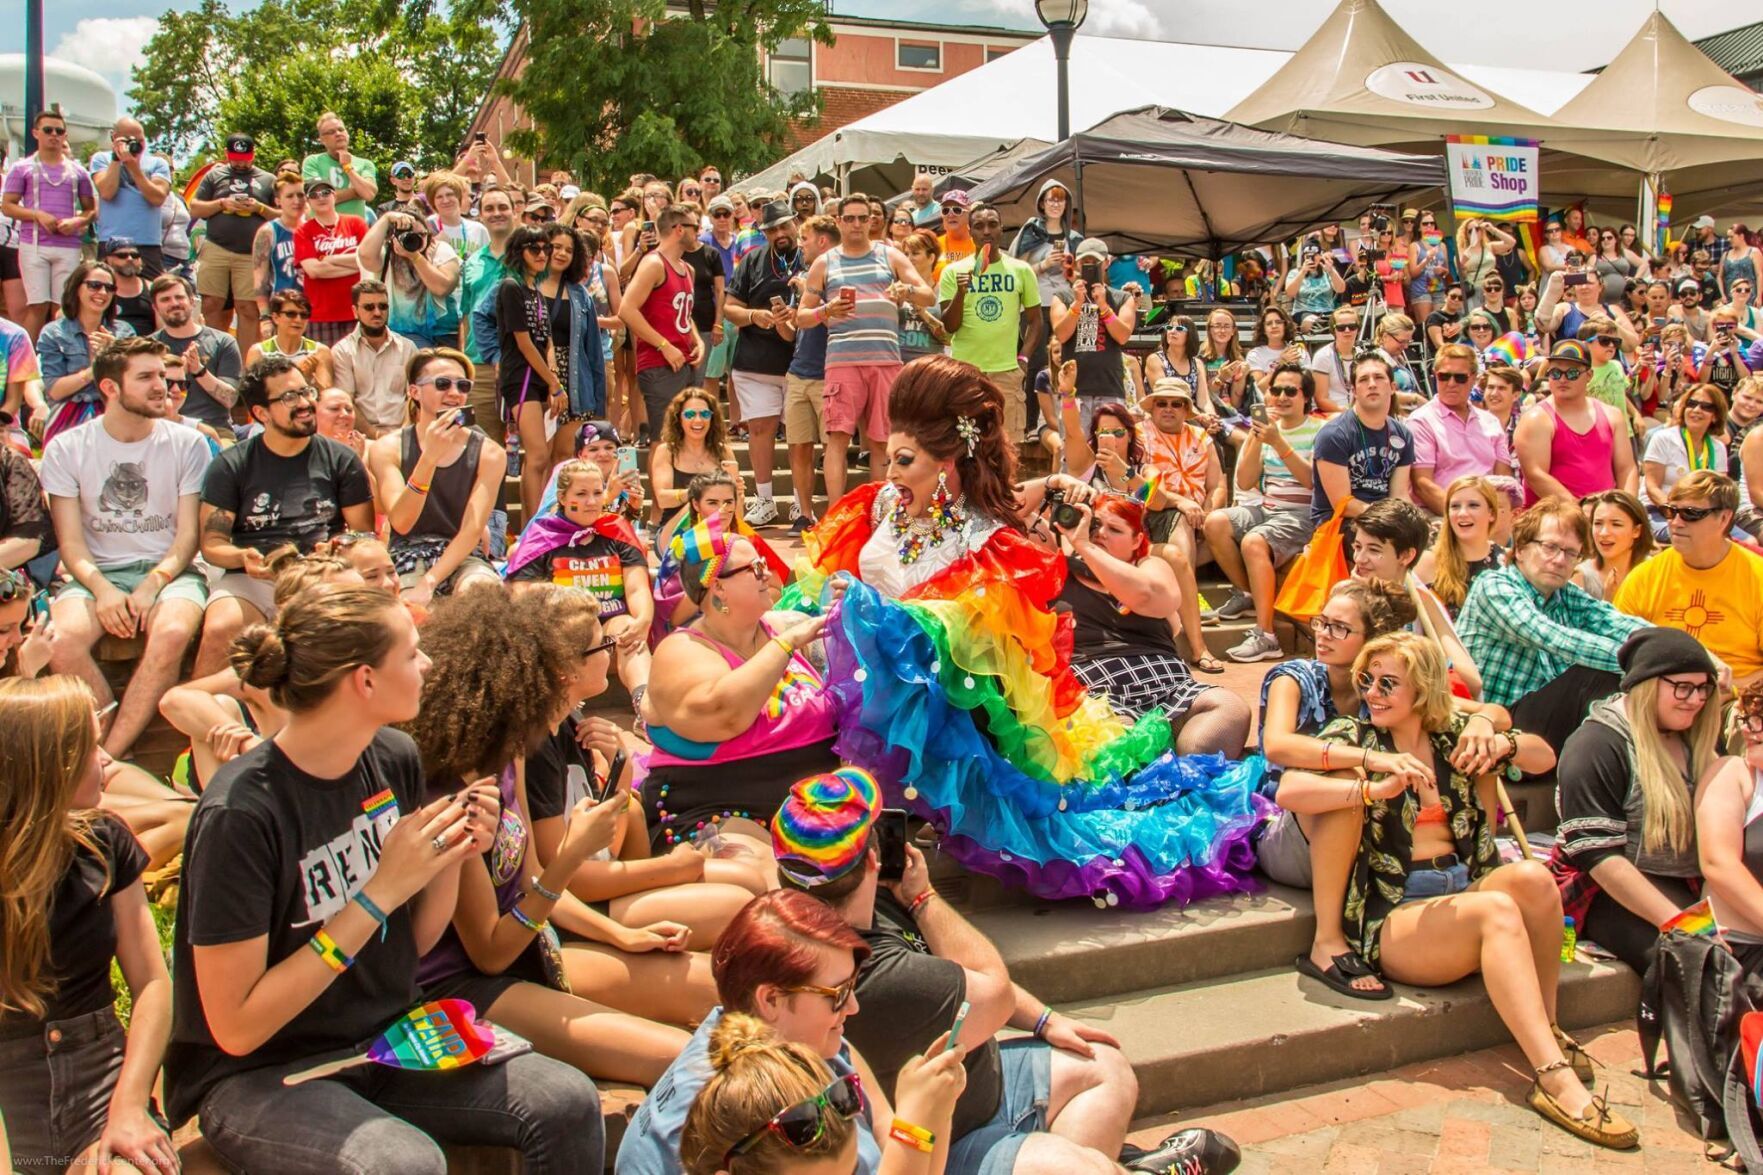 Frederick Pride celebrates, connects LGBTQ community Arts and entertainment fredericknewspost